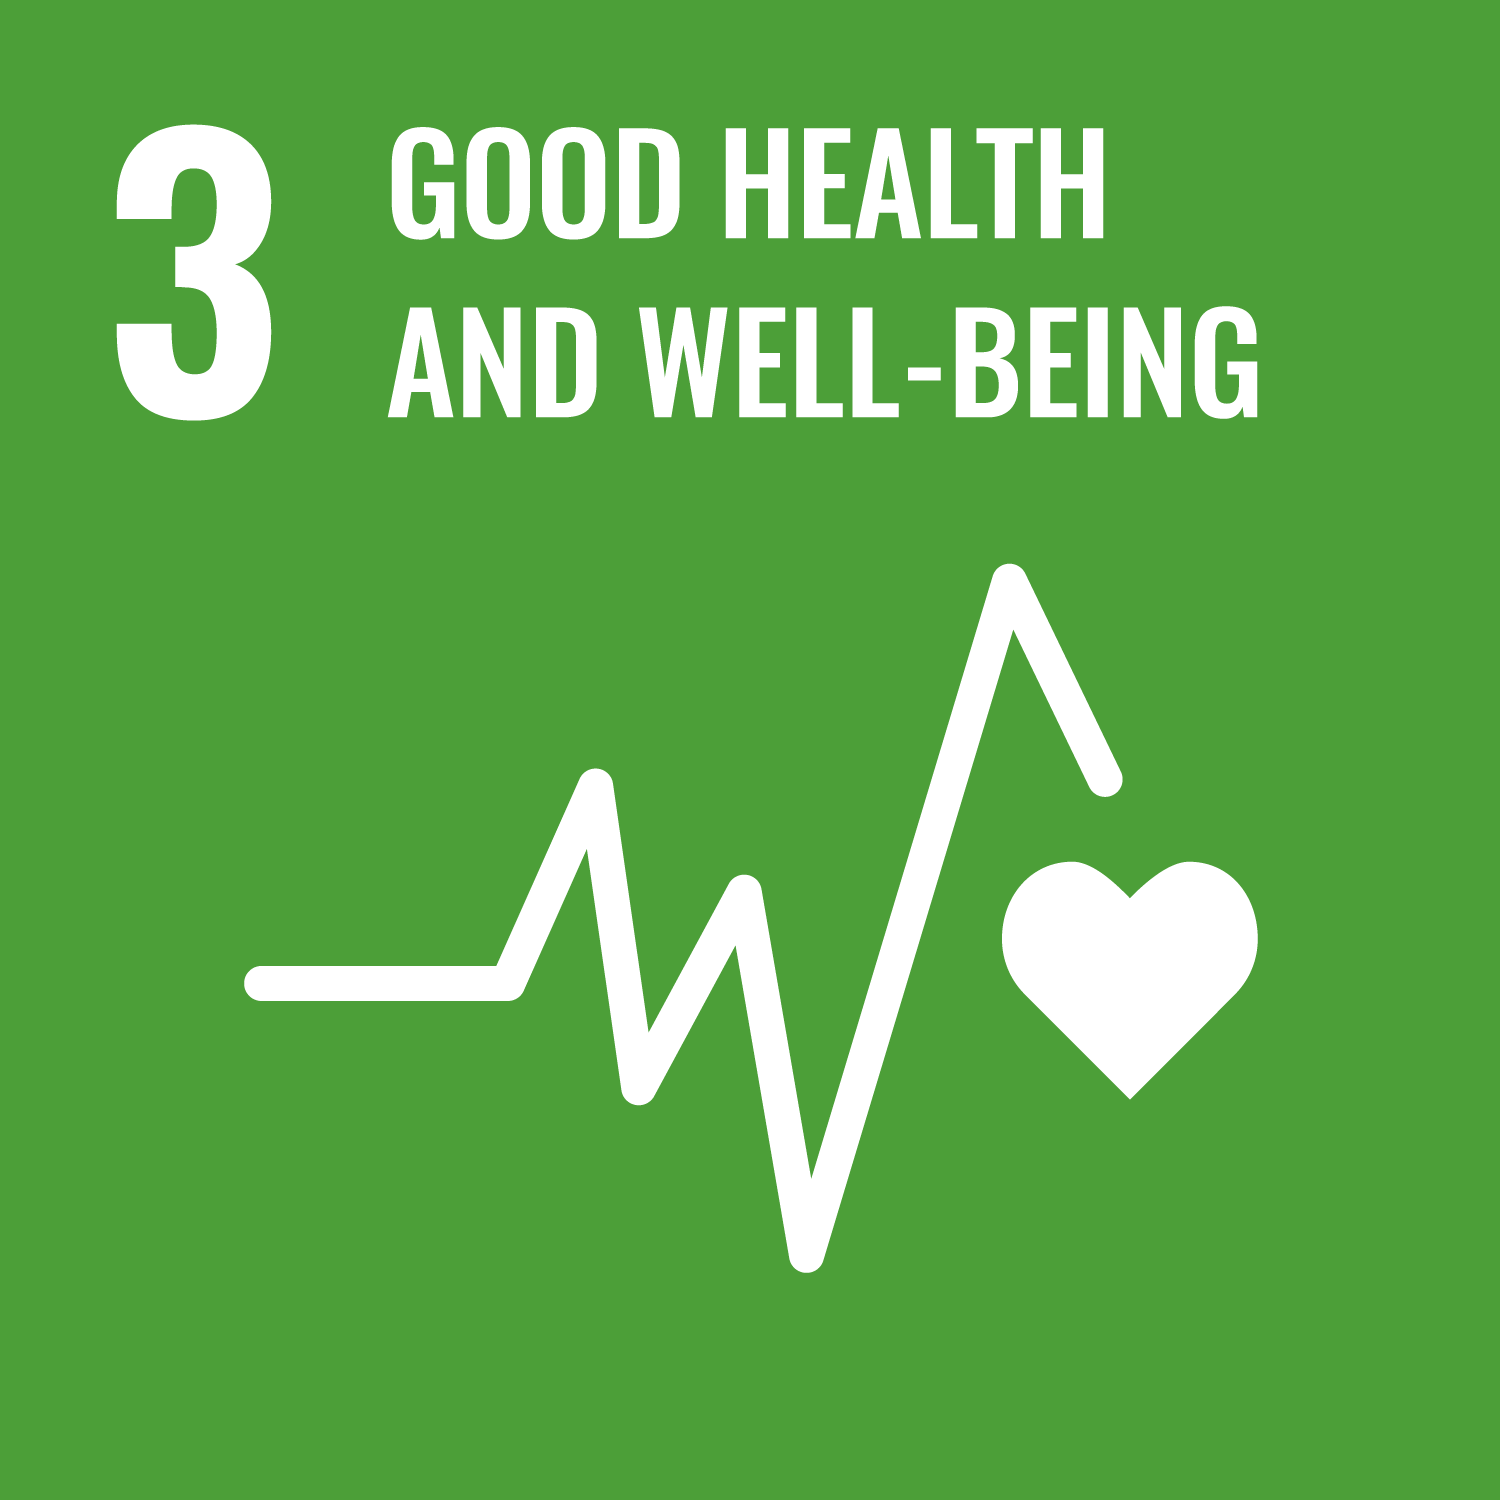 SDG 3: Good Health and Well Being